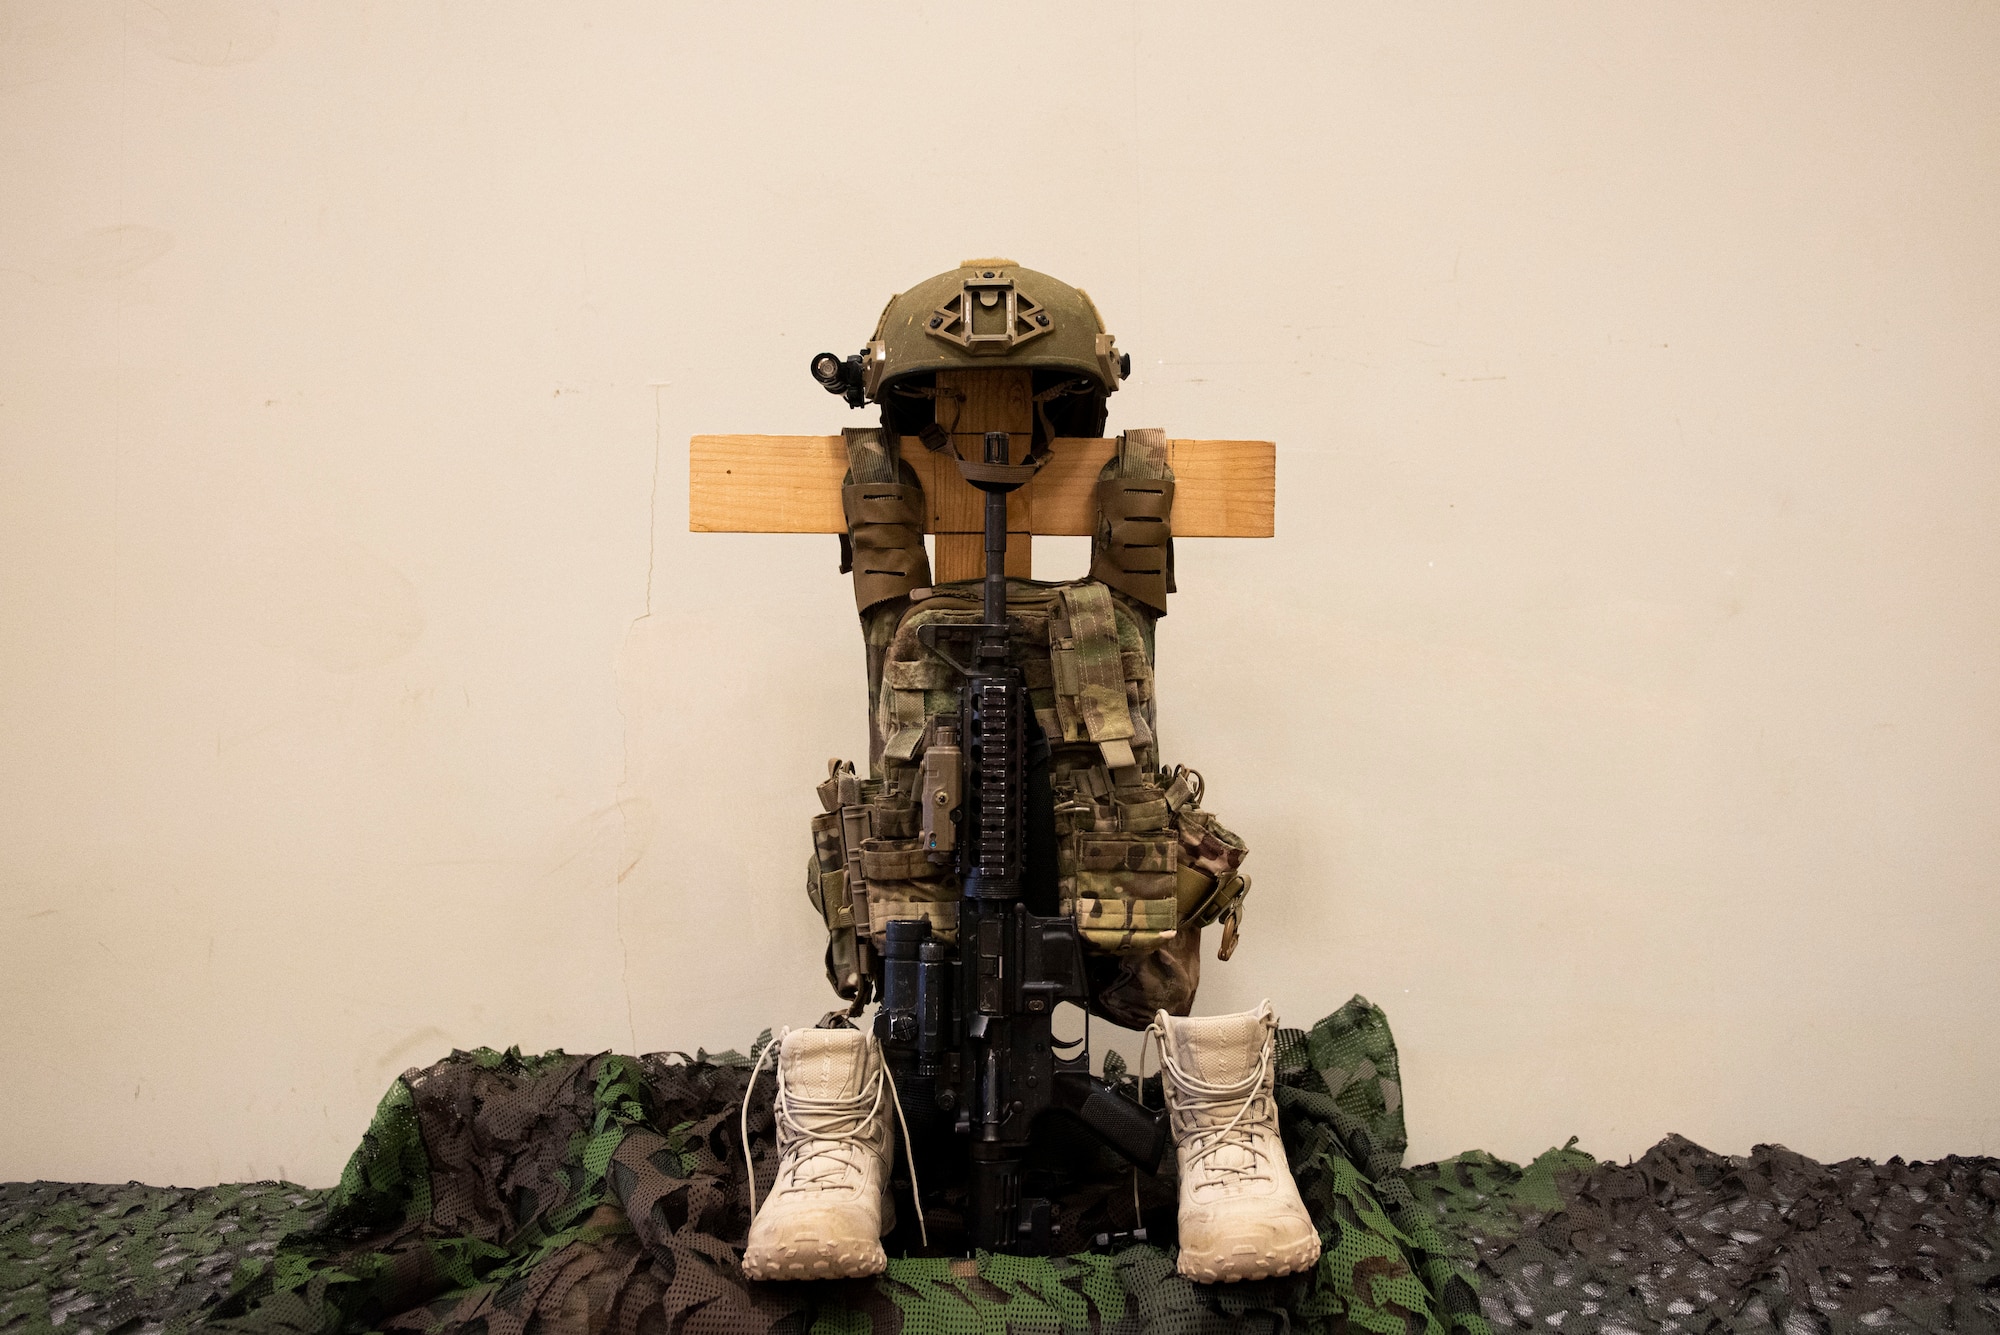 A battlefield cross sits on display during a Final Guard Mount ceremony May 15, 2020, at Incirlik Air Base, Turkey. The battlefield cross is a memorial which commemorates fallen troops, featuring a rifle, helmet and empty pair of boots. (U.S. Air Force photo by Staff Sgt. Joshua Magbanua)